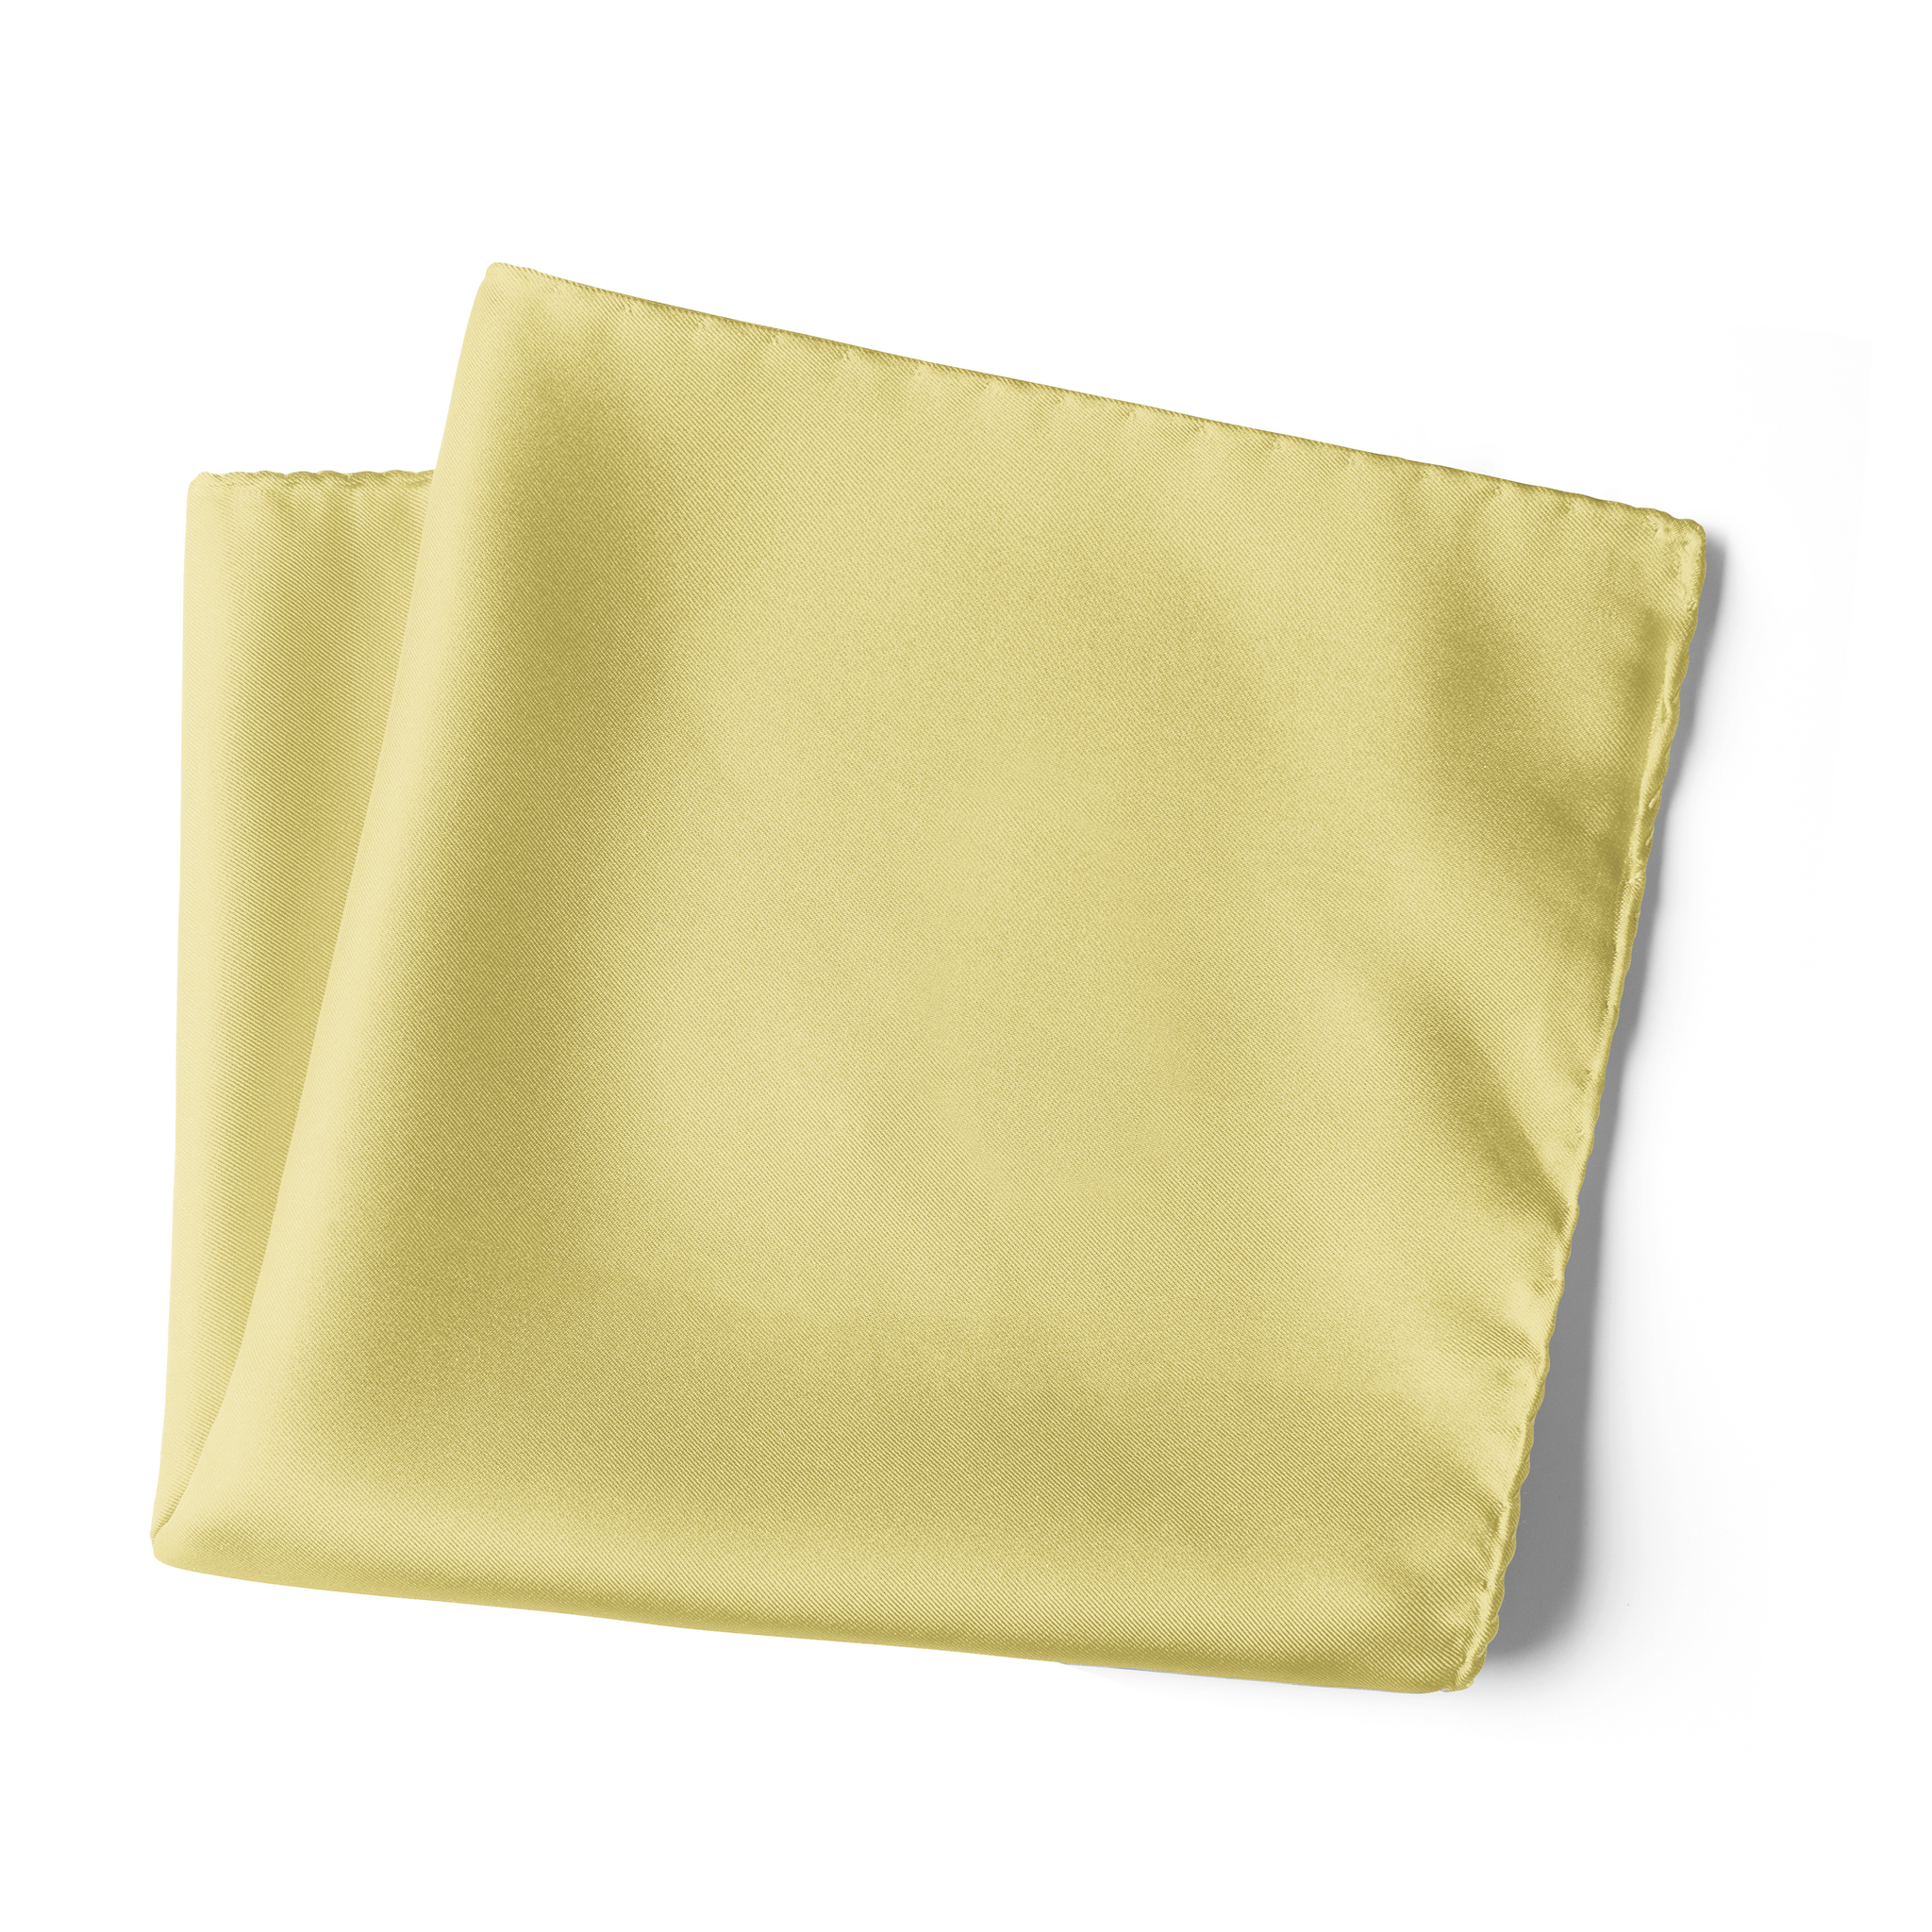 Chokore Lime Satin Silk pocket square from the Solids Line